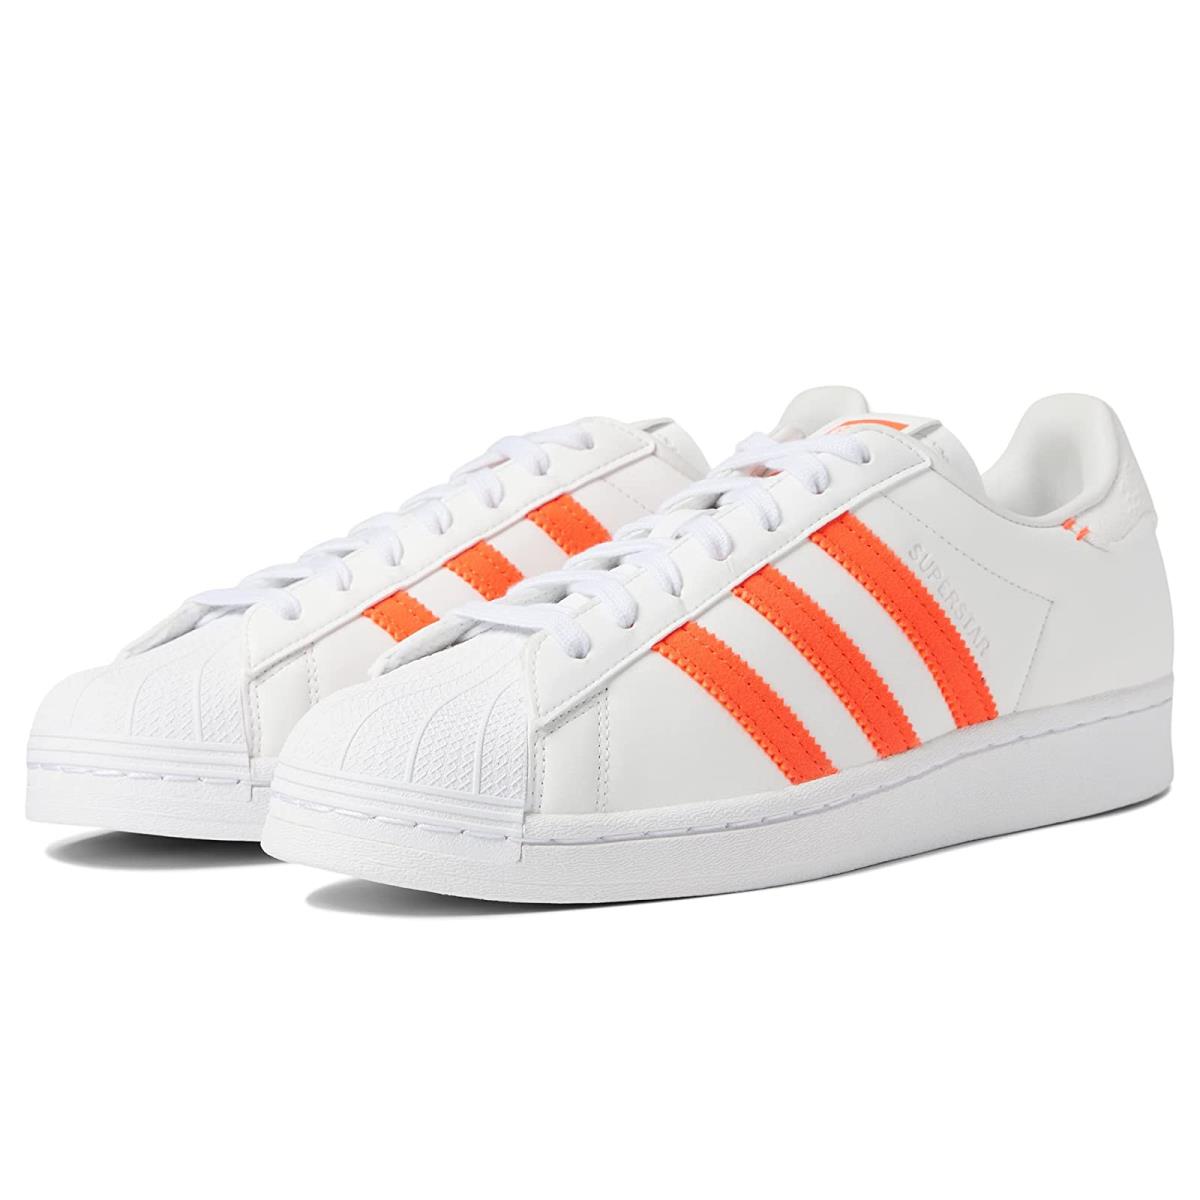 Woman`s Sneakers Athletic Shoes Adidas Originals Superstar W Crystal White/Solar Red/Grey